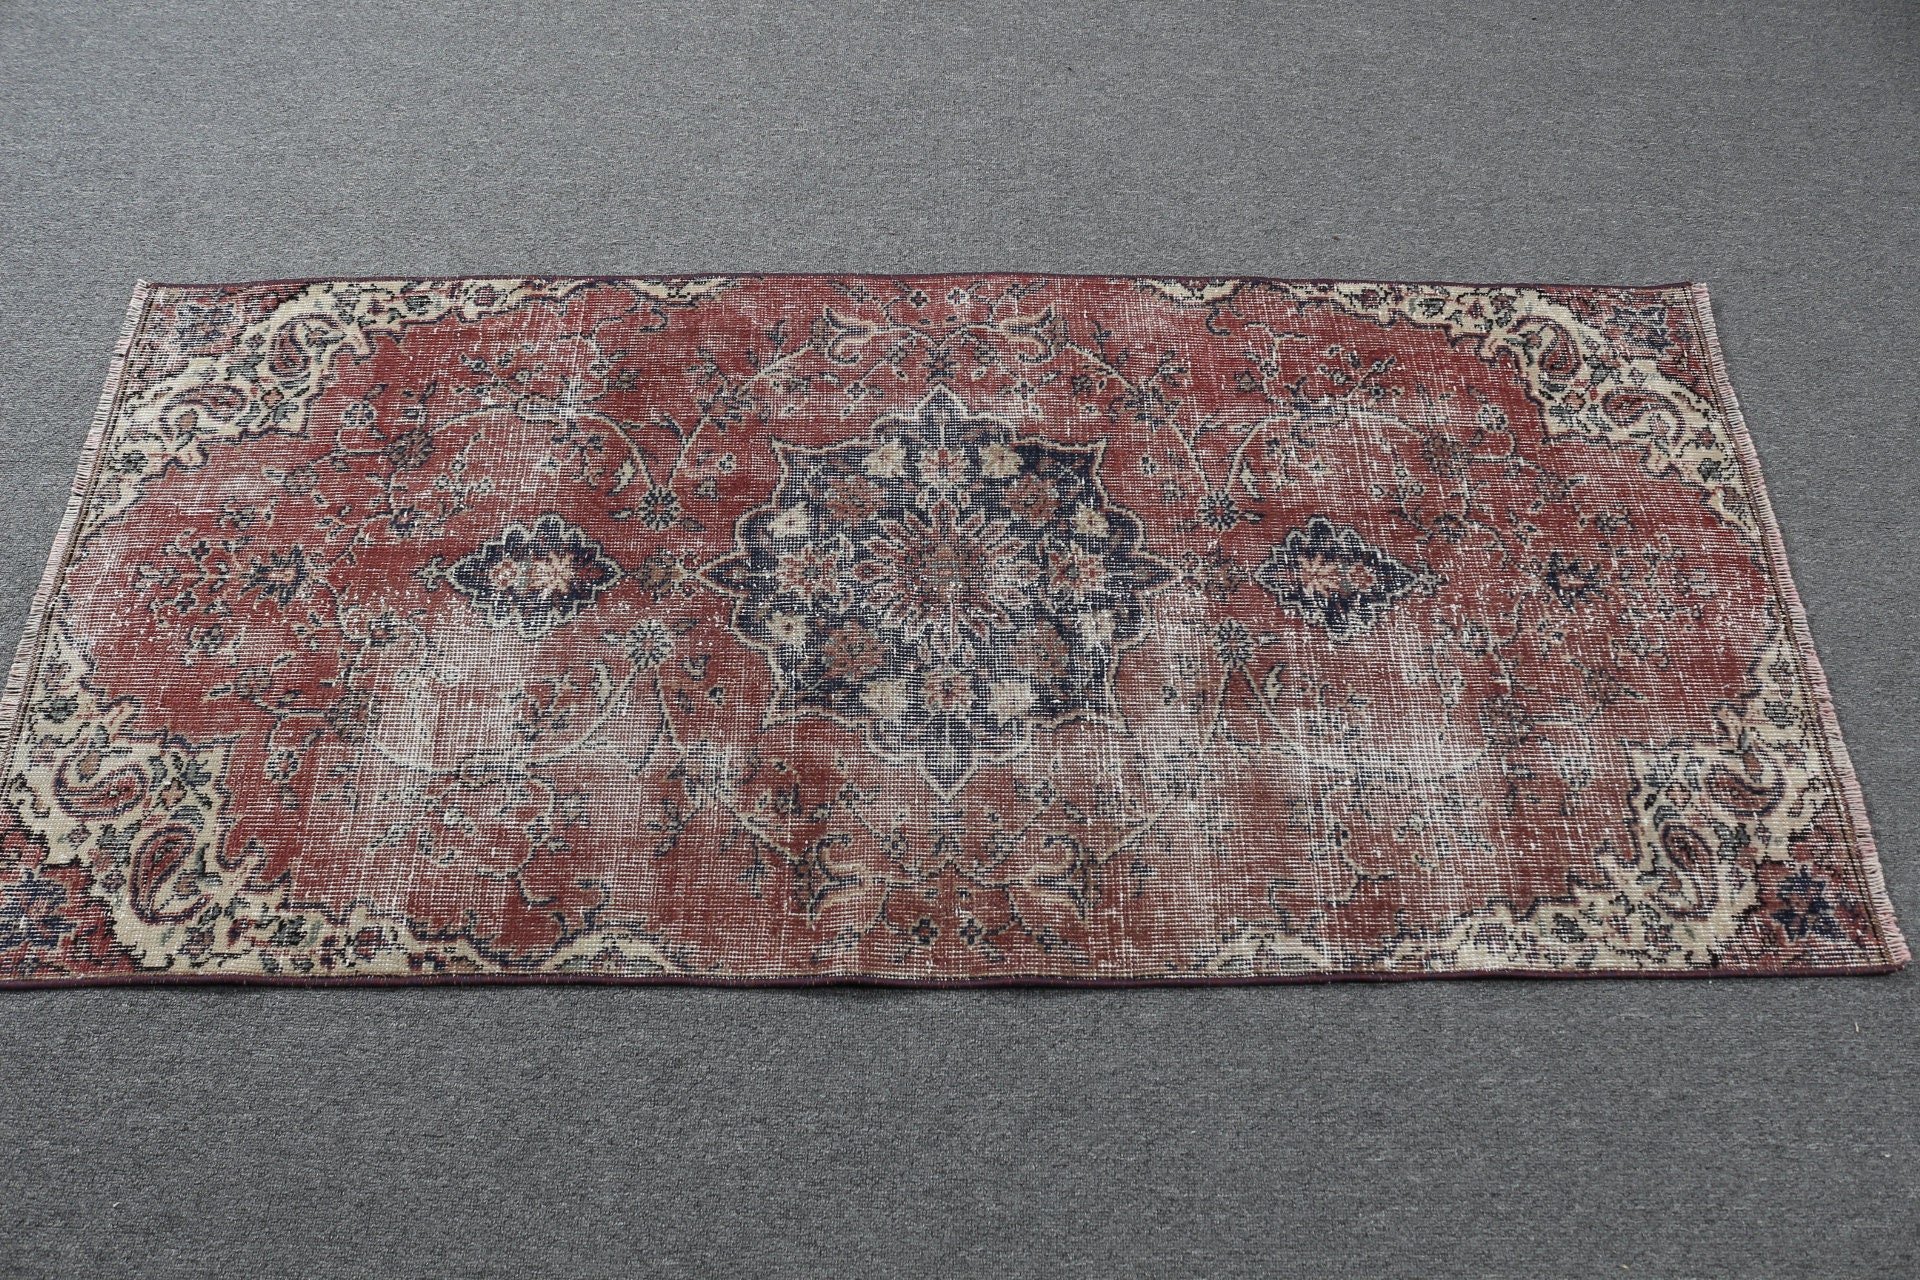 Rugs for Bath, Turkish Rug, Car Mat Rug, 6x2.5 ft Small Rugs, Muted Rug, Cool Rug, Red Cool Rugs, Bedroom Rug, Vintage Rugs